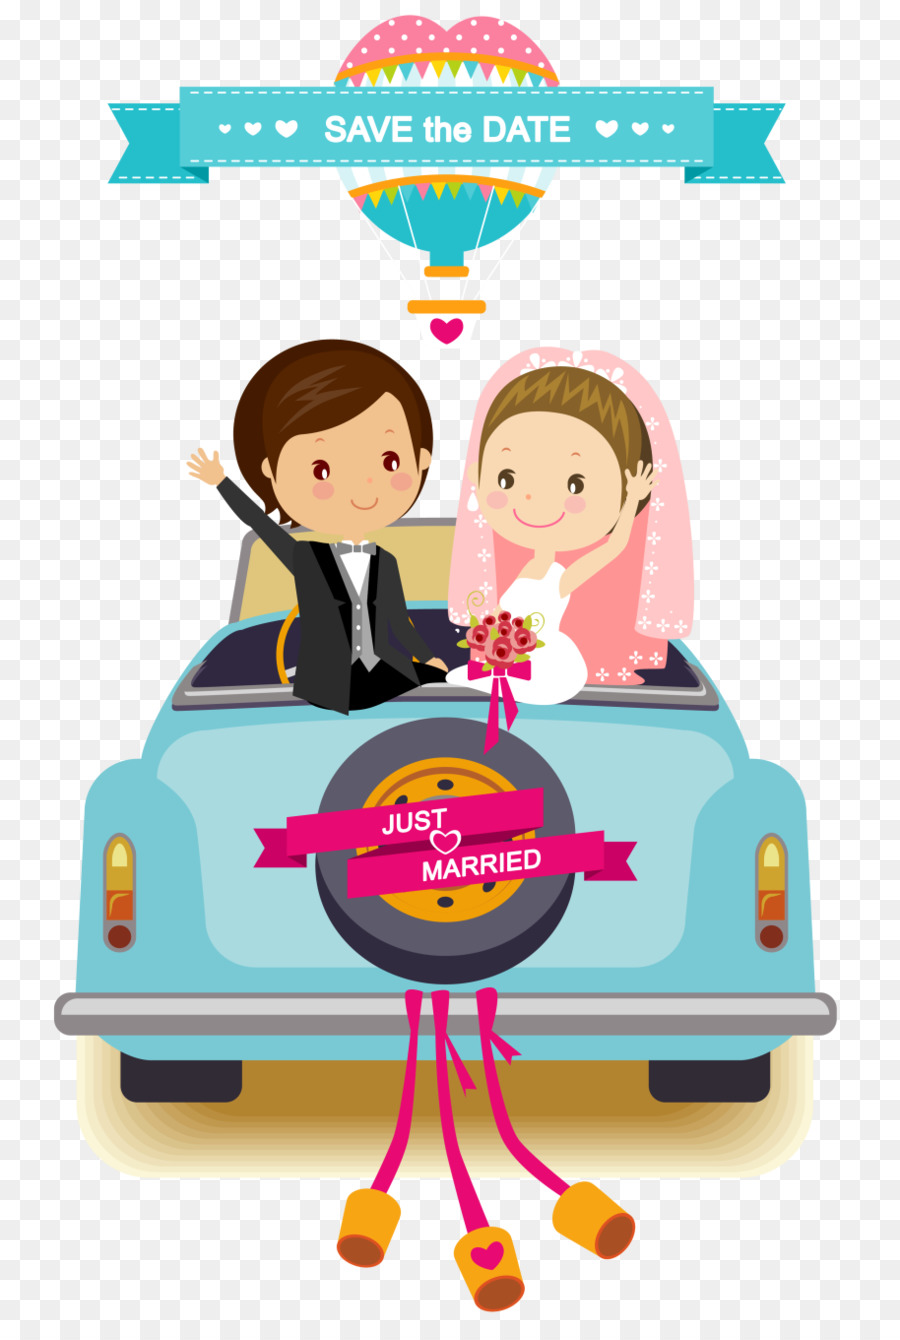 Wedding Save The Date Cartoon Images